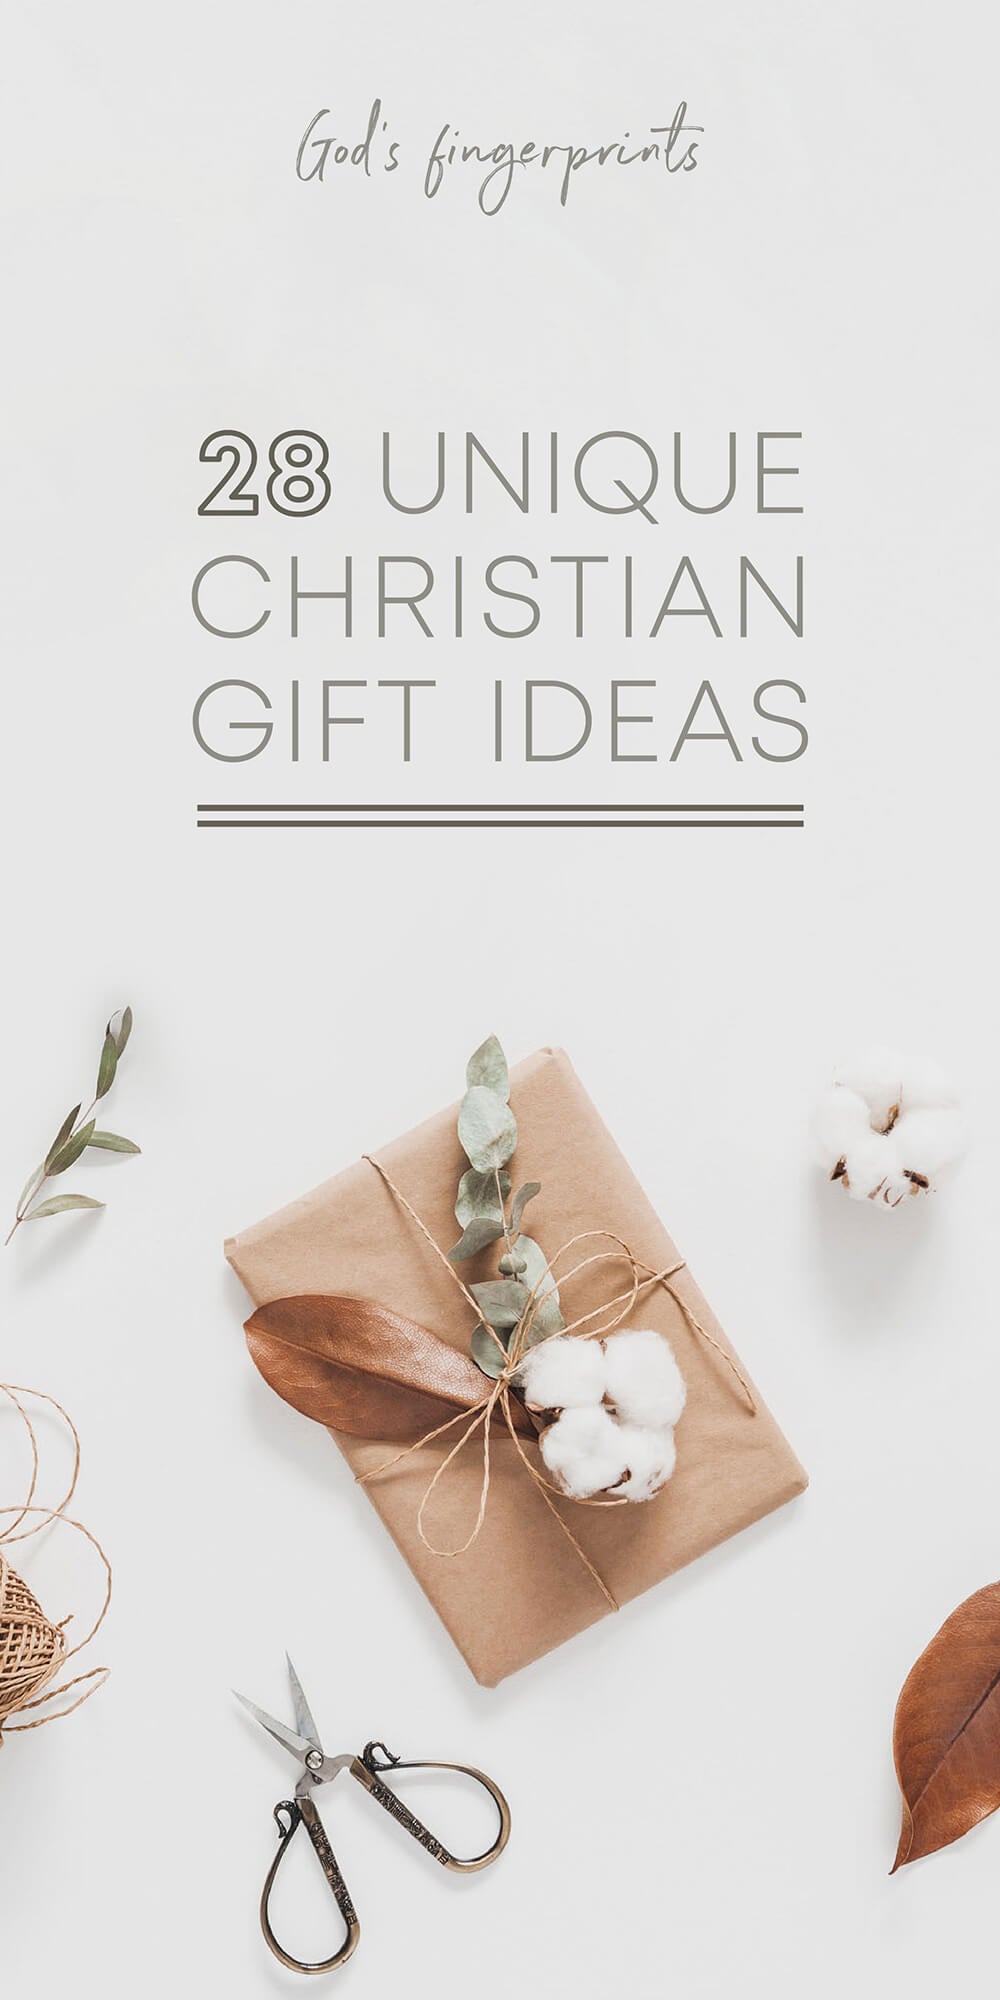 15 Christian Gifts Under $5 (Cheap yet Thoughtful! Click here